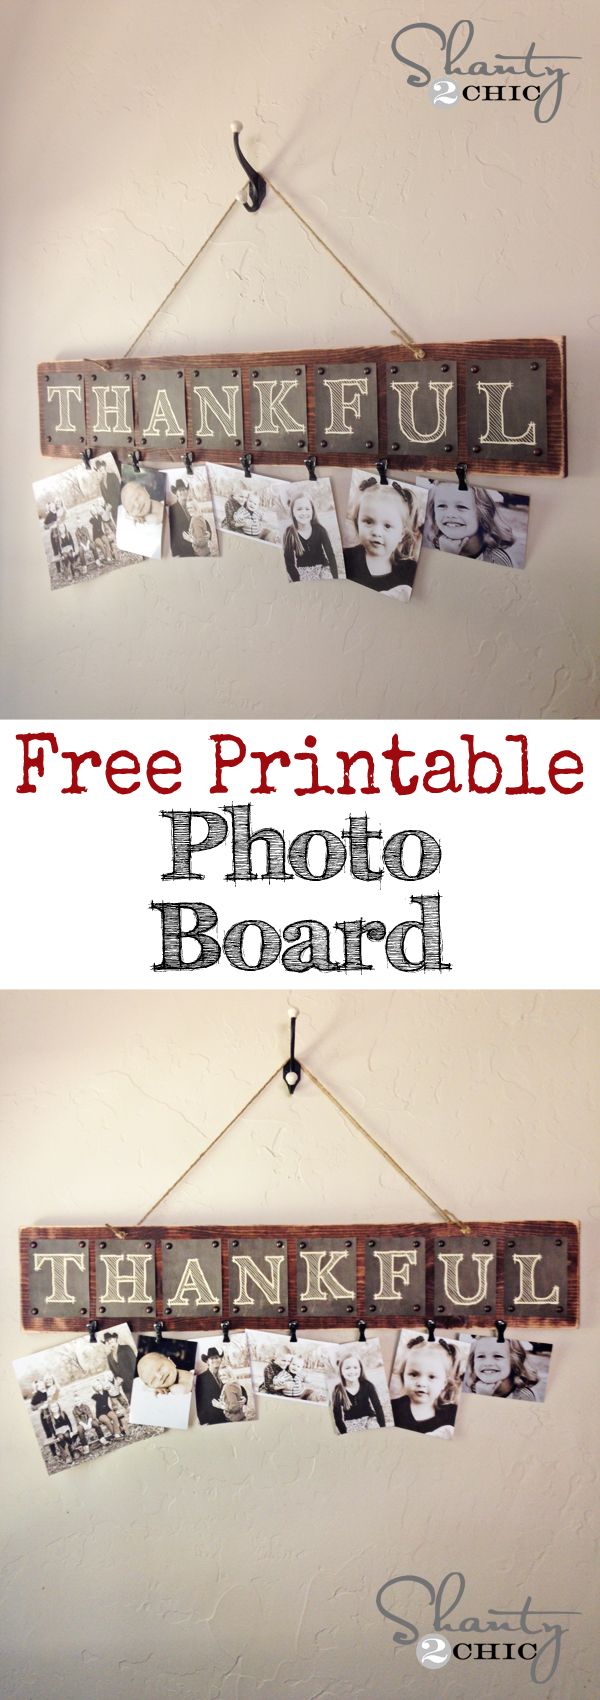 DIY Thankful Photo Board with Free Printables. 